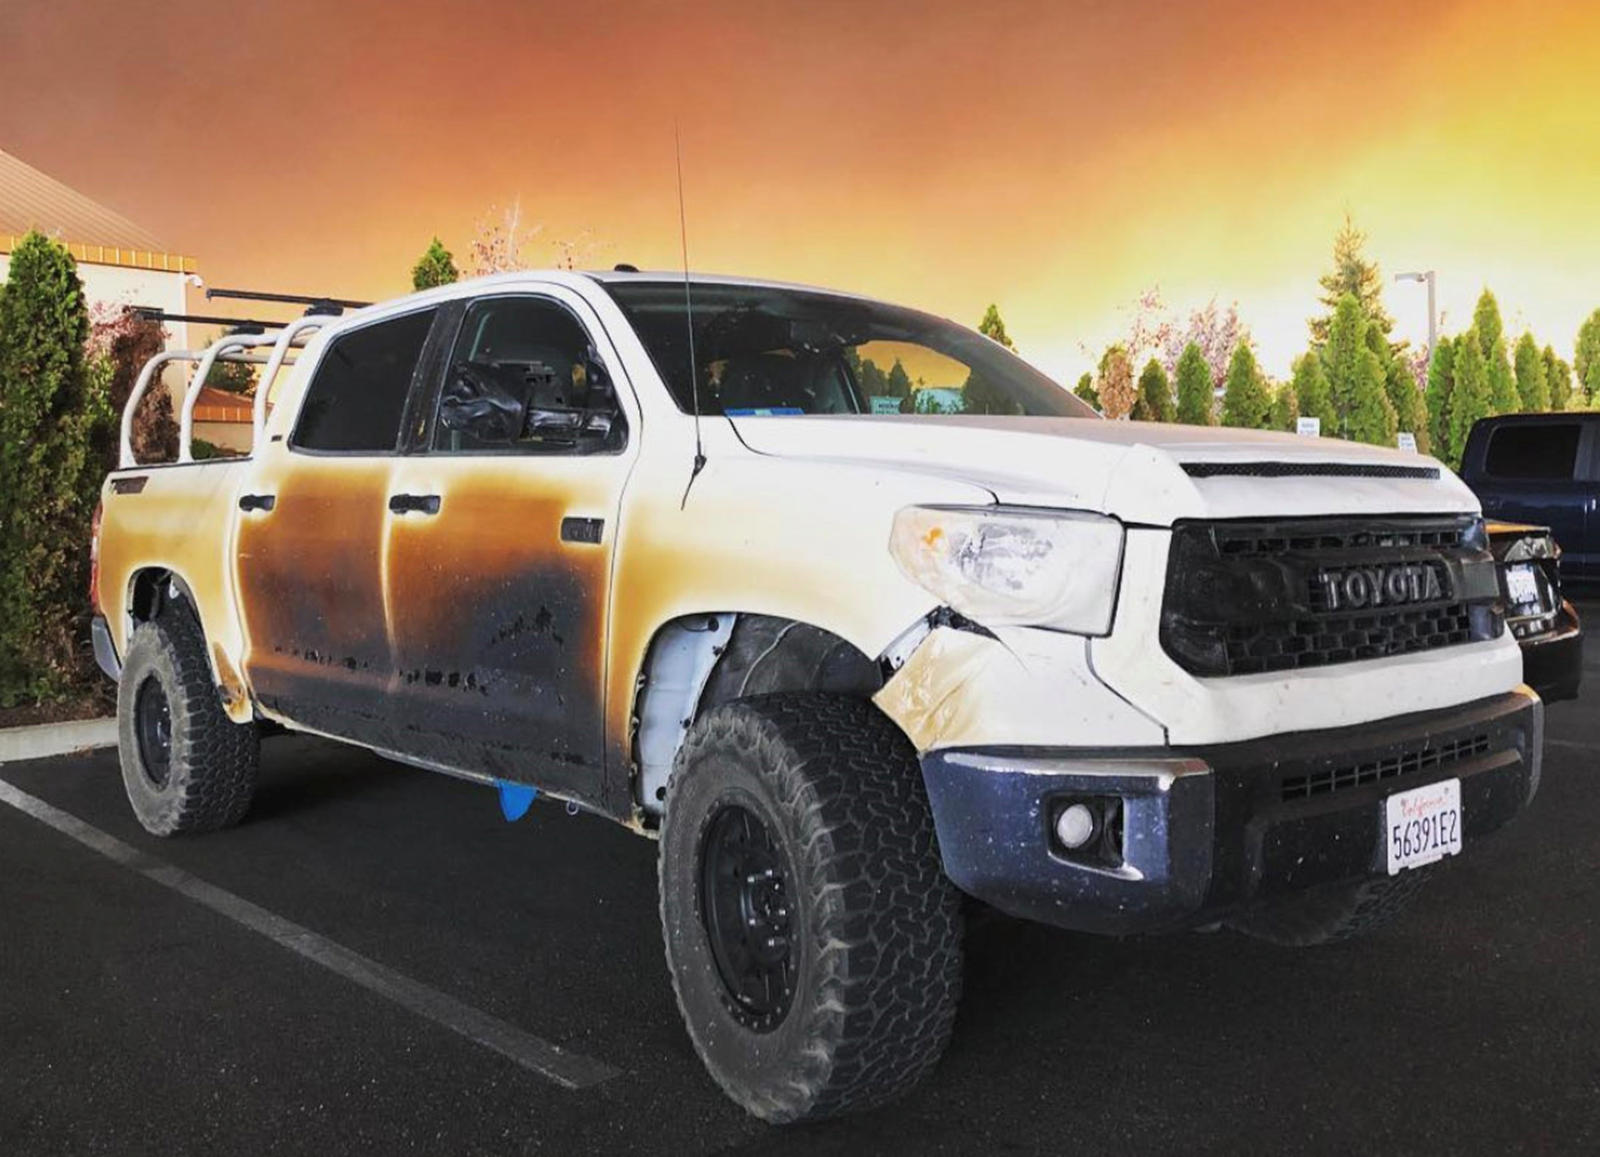 417 Nice Toyota tundra 2019 price for Android Wallpaper